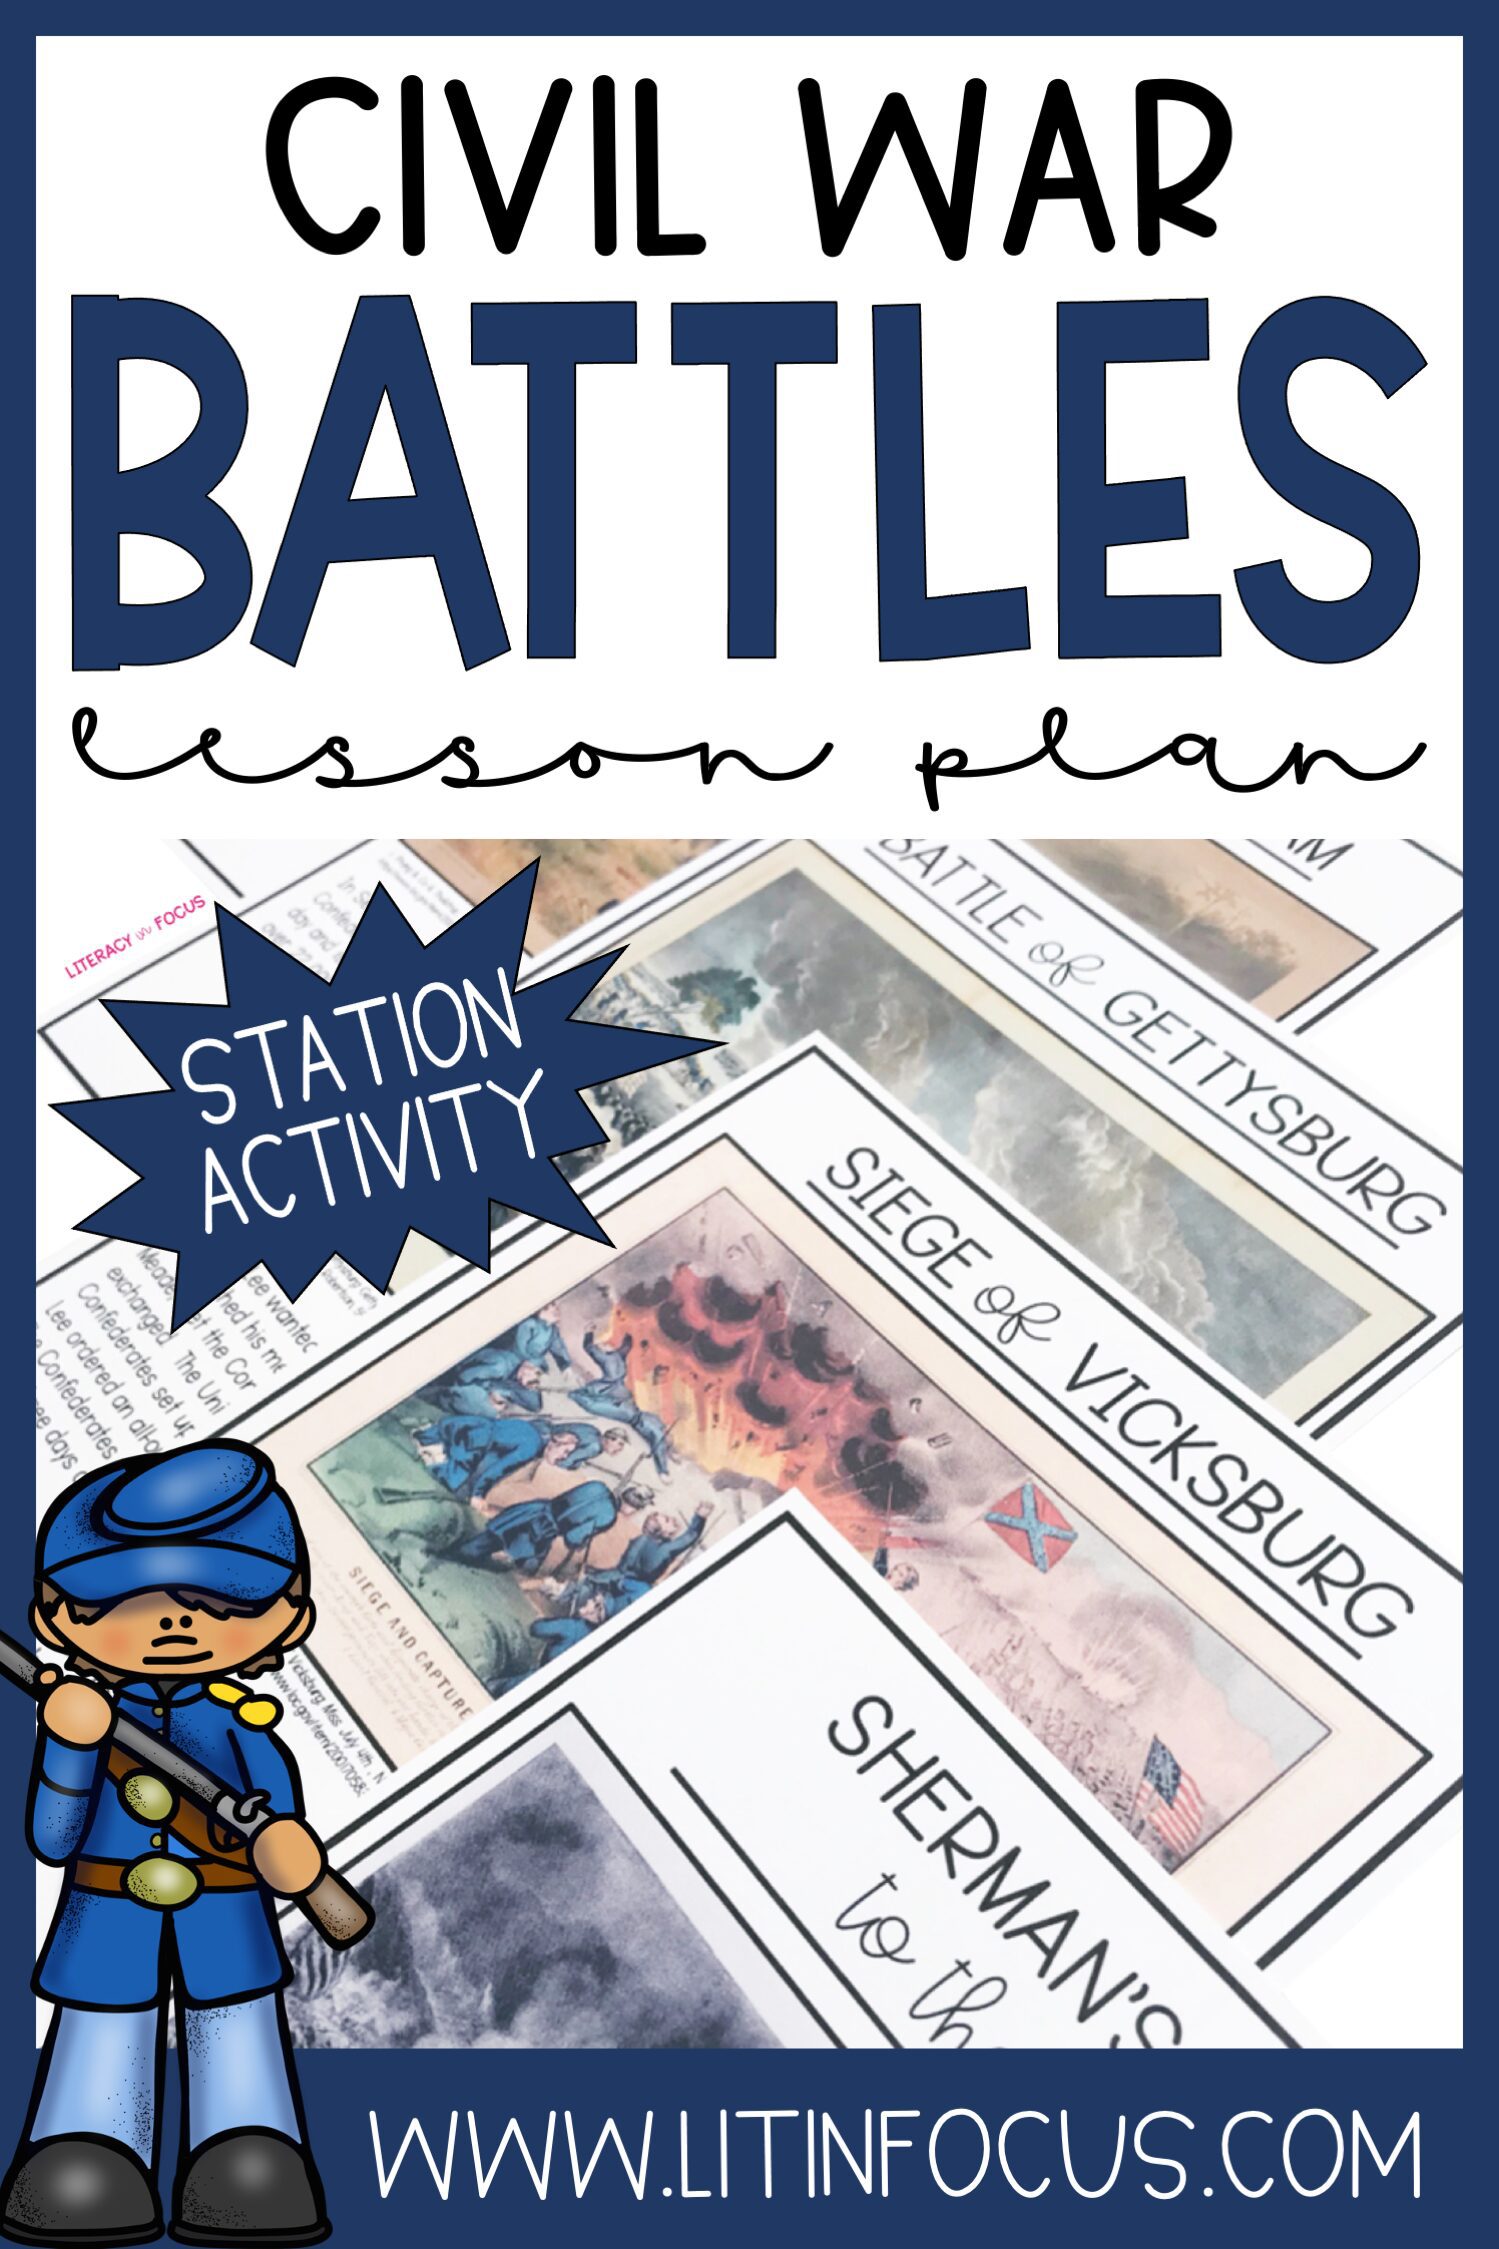 Civil War Battles | Lesson and Activity For Kids